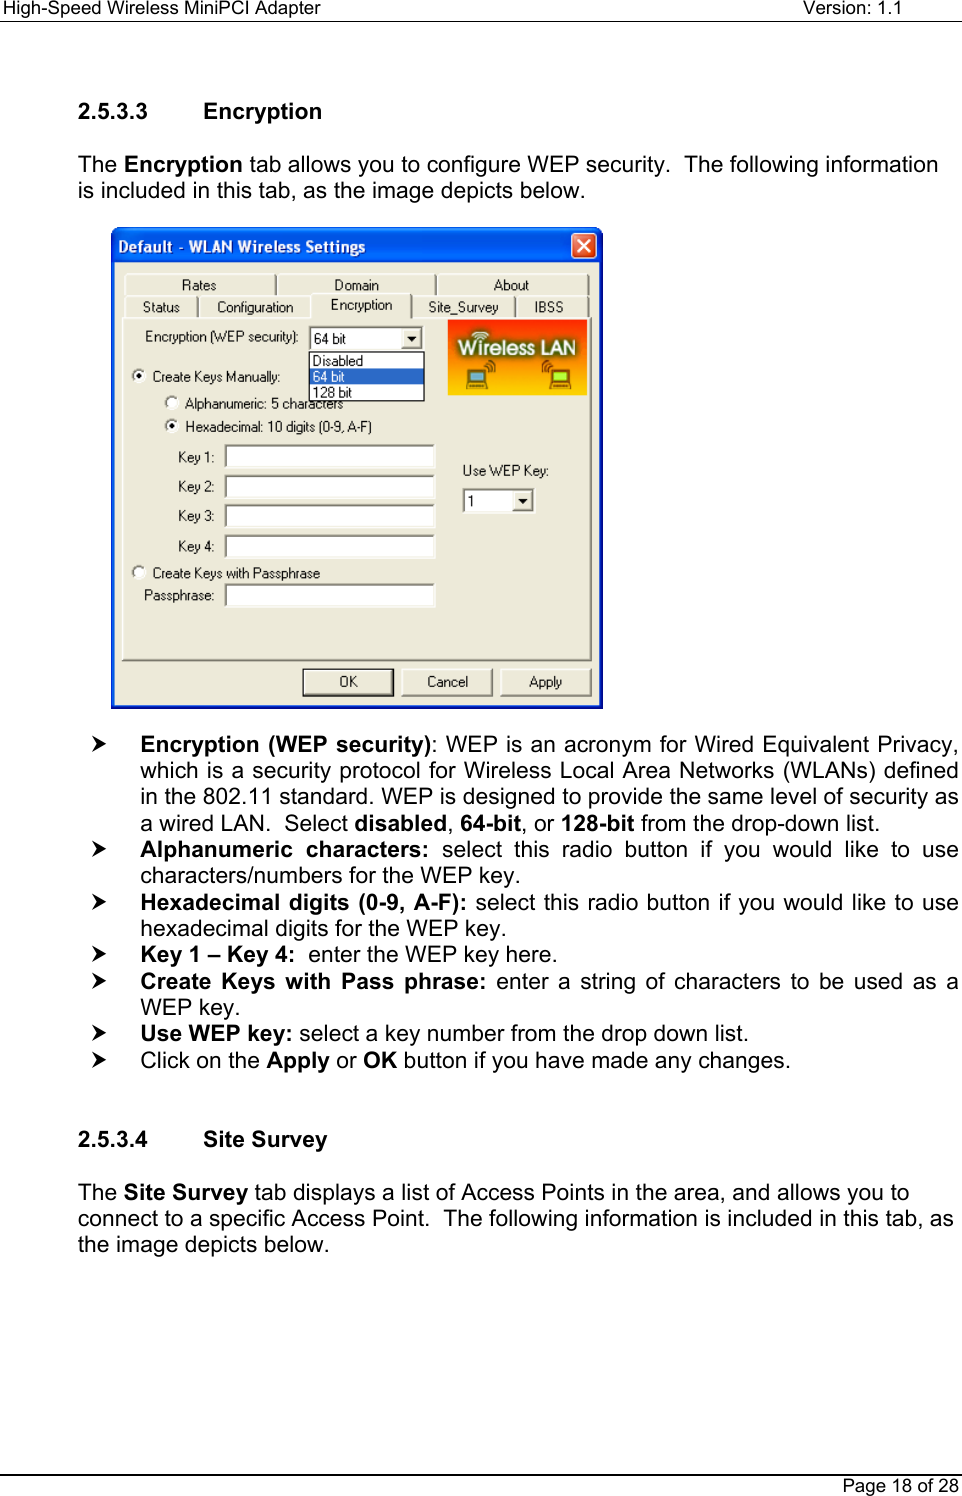 High-Speed Wireless MiniPCI Adapter Version: 1.1Page 18 of 282.5.3.3    EncryptionThe Encryption tab allows you to configure WEP security.  The following informationis included in this tab, as the image depicts below.h Encryption (WEP security): WEP is an acronym for Wired Equivalent Privacy,which is a security protocol for Wireless Local Area Networks (WLANs) definedin the 802.11 standard. WEP is designed to provide the same level of security asa wired LAN.  Select disabled, 64-bit, or 128-bit from the drop-down list.h Alphanumeric characters: select this radio button if you would like to usecharacters/numbers for the WEP key.h Hexadecimal digits (0-9, A-F): select this radio button if you would like to usehexadecimal digits for the WEP key.h Key 1 – Key 4:  enter the WEP key here.h Create Keys with Pass phrase: enter a string of characters to be used as aWEP key.h Use WEP key: select a key number from the drop down list.h  Click on the Apply or OK button if you have made any changes.2.5.3.4    Site SurveyThe Site Survey tab displays a list of Access Points in the area, and allows you toconnect to a specific Access Point.  The following information is included in this tab, asthe image depicts below.